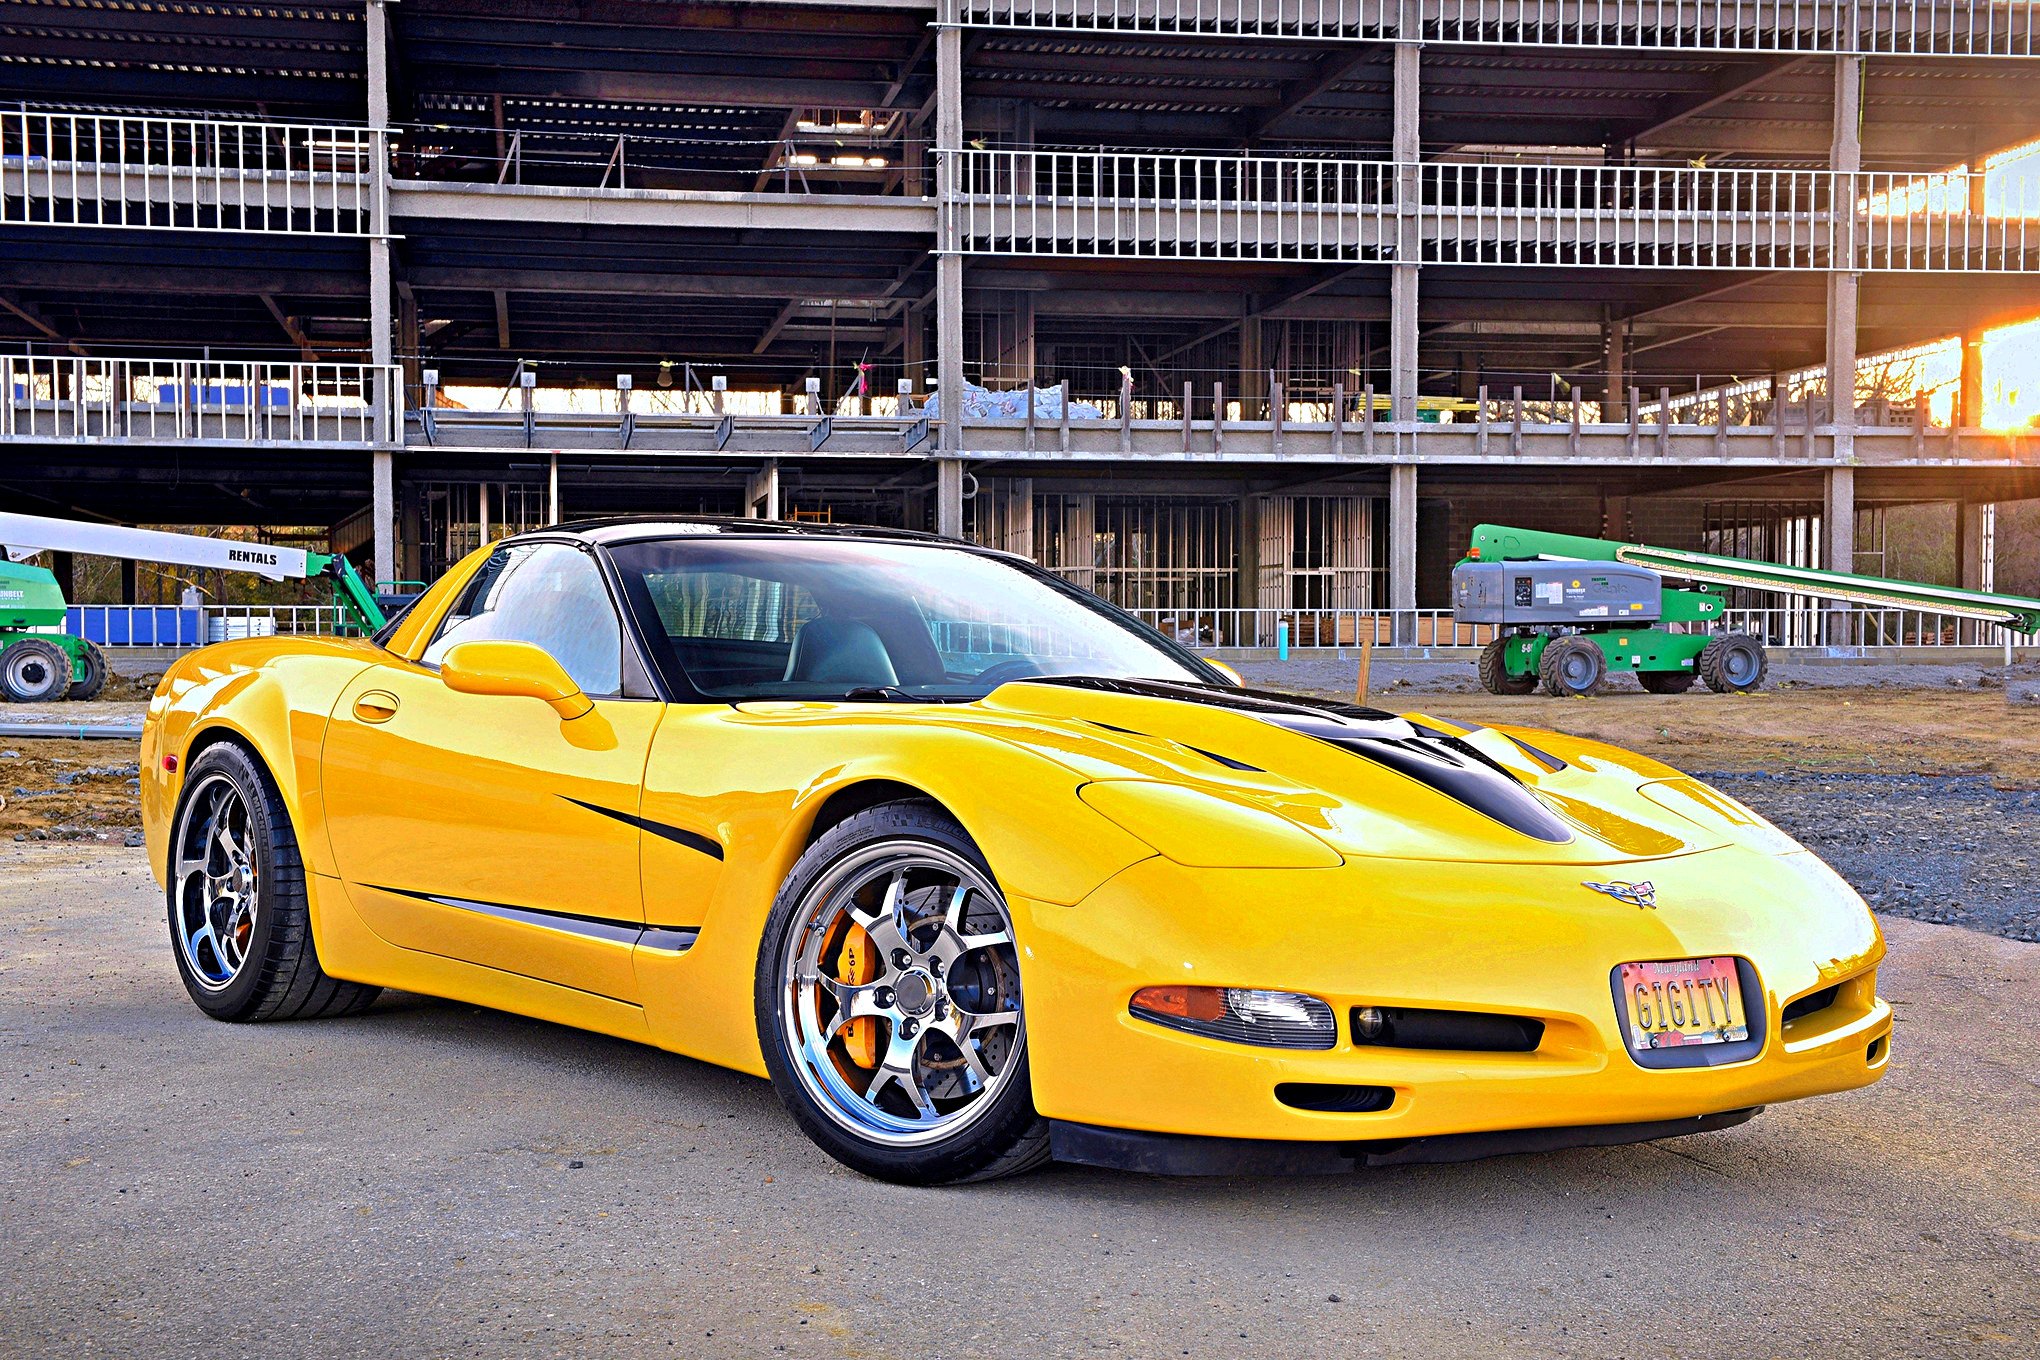 The Ultimate Daily Supercar: Yellow Chevy Corvette Enhanced with Aftermarke...